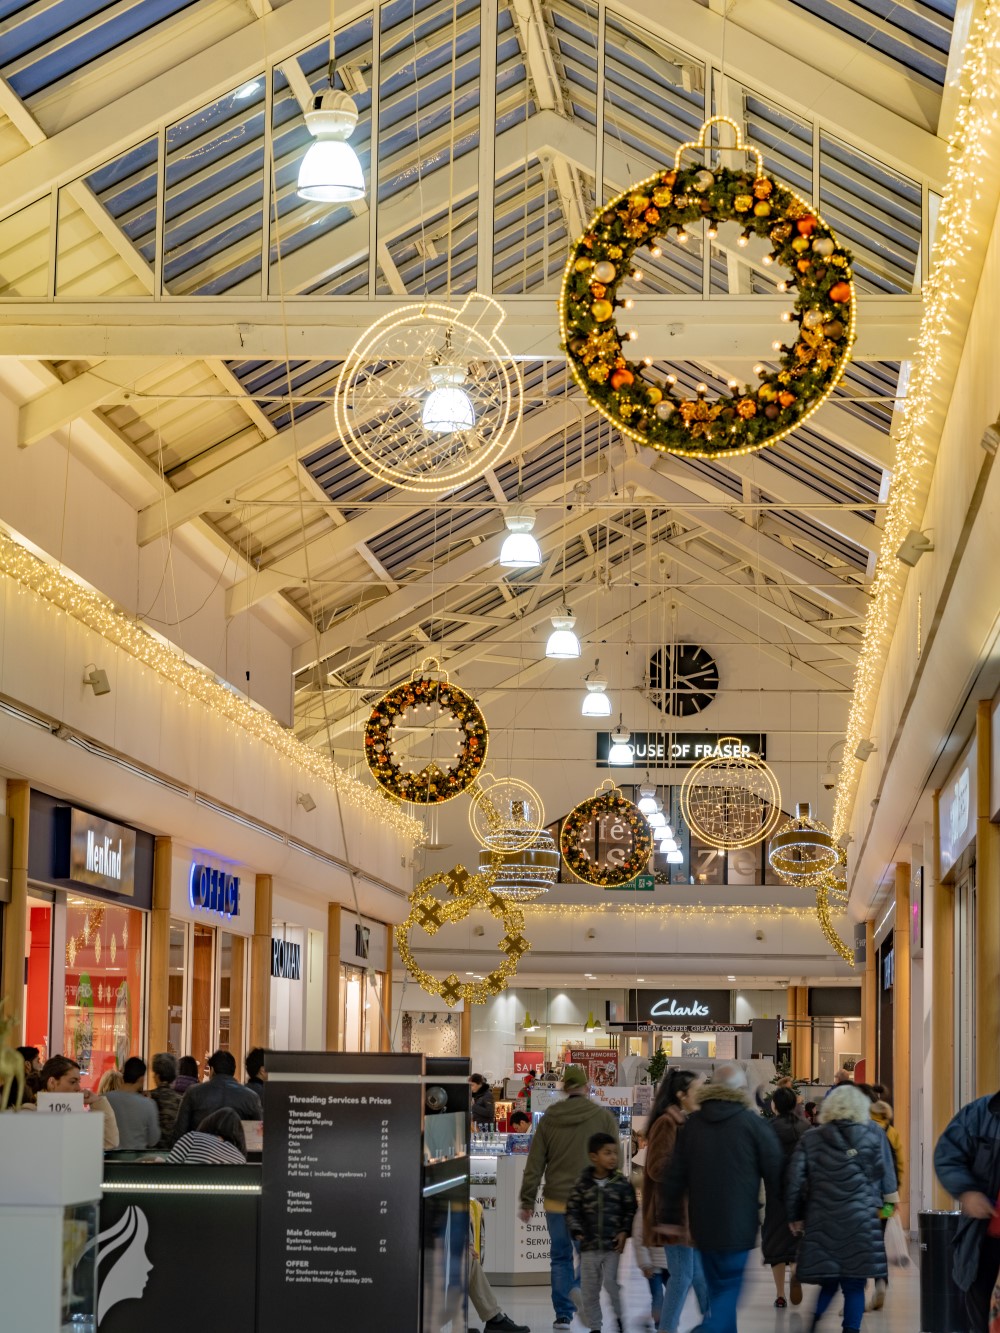 A shopping centre display featuring bauble motifs suspended from the ceiling in warm white and warm white and green decorated with gold and copper baubles.